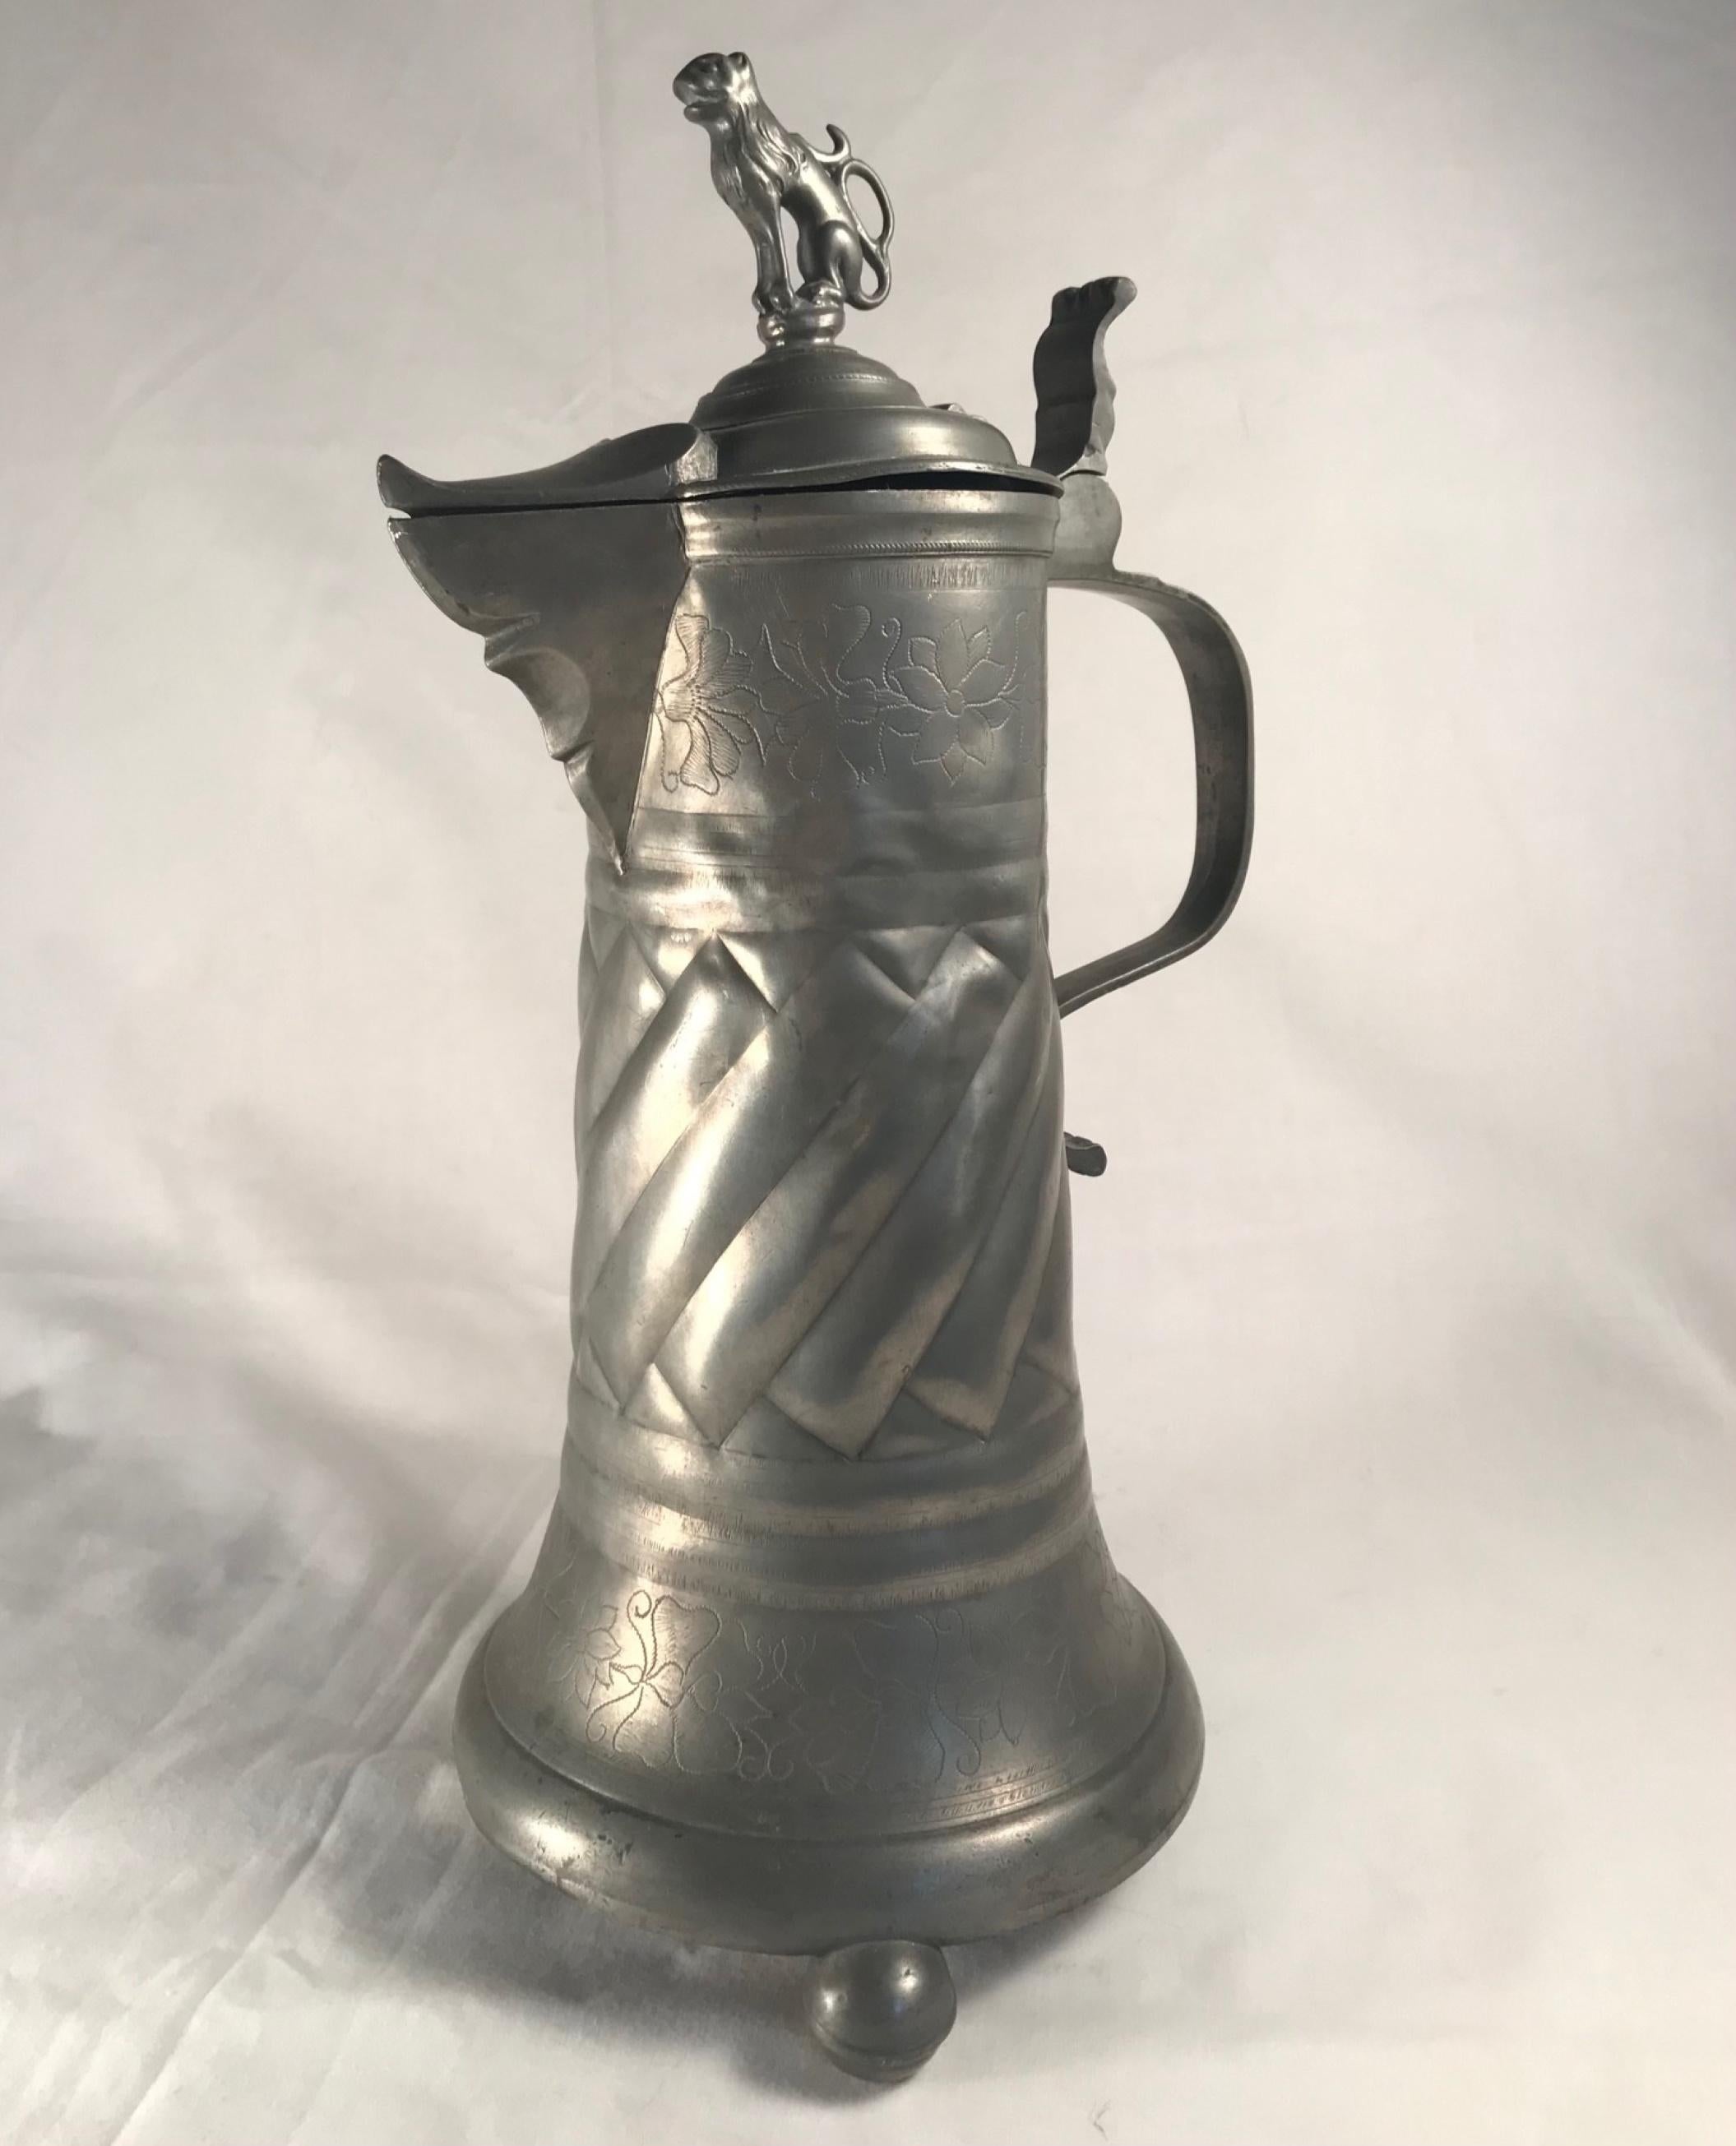 18th century Austrian-Hungarian pewter tankard hinged lion lid.

Fine antique Baroque pewter tankard with twist fluted sides and hinged lid topped with a lion figurine. The tankard is embellished with floral engravings. On the inside bottom a